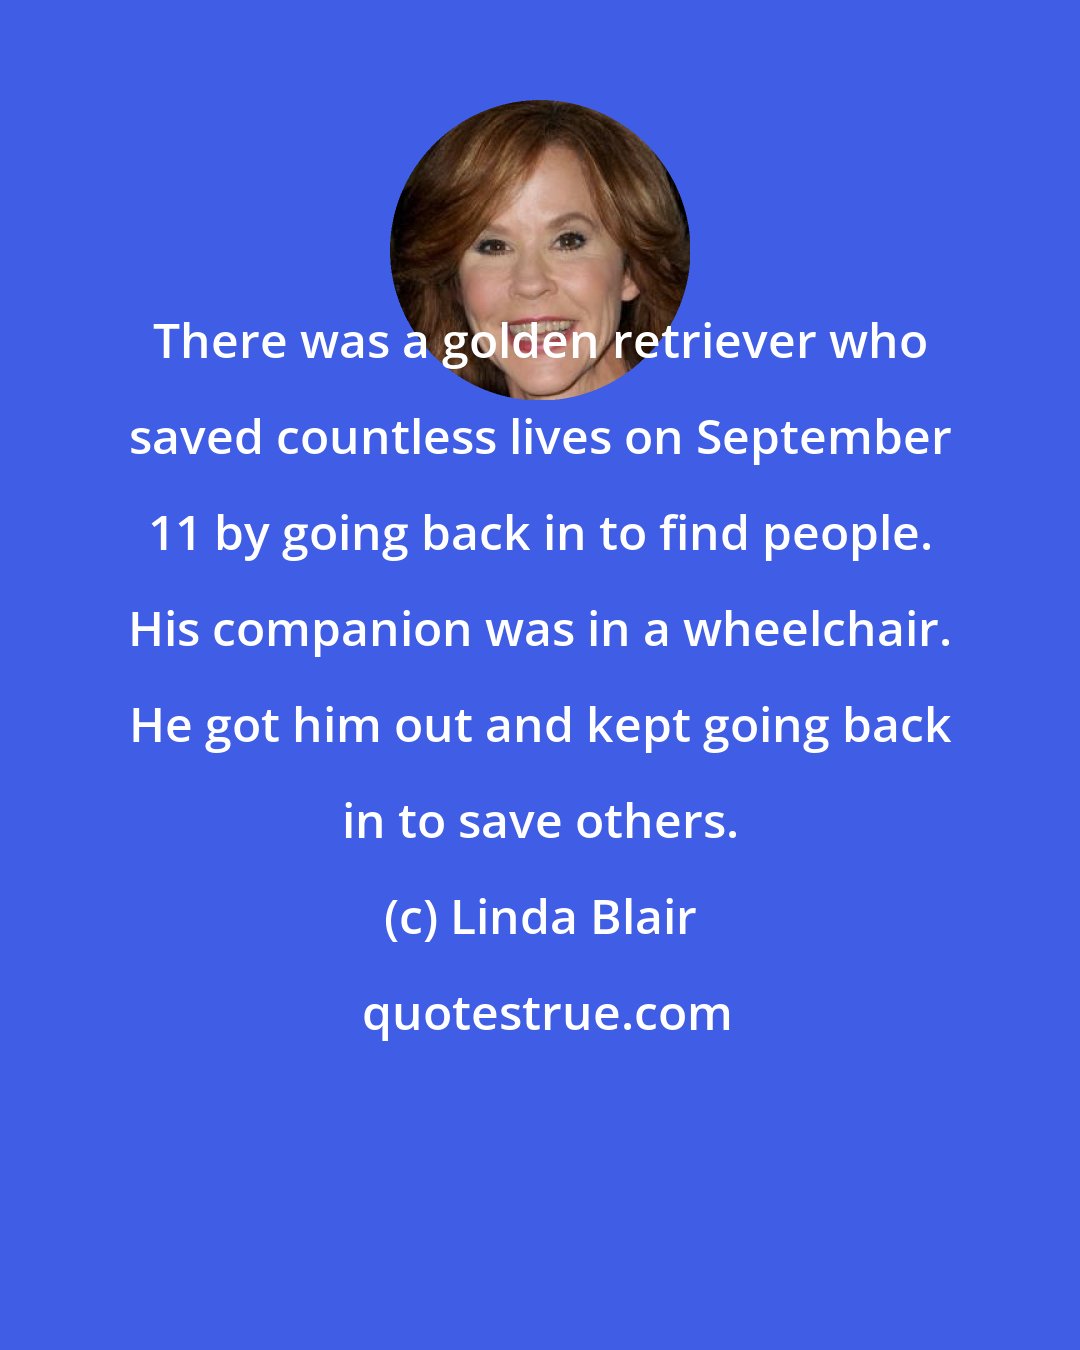 Linda Blair: There was a golden retriever who saved countless lives on September 11 by going back in to find people. His companion was in a wheelchair. He got him out and kept going back in to save others.